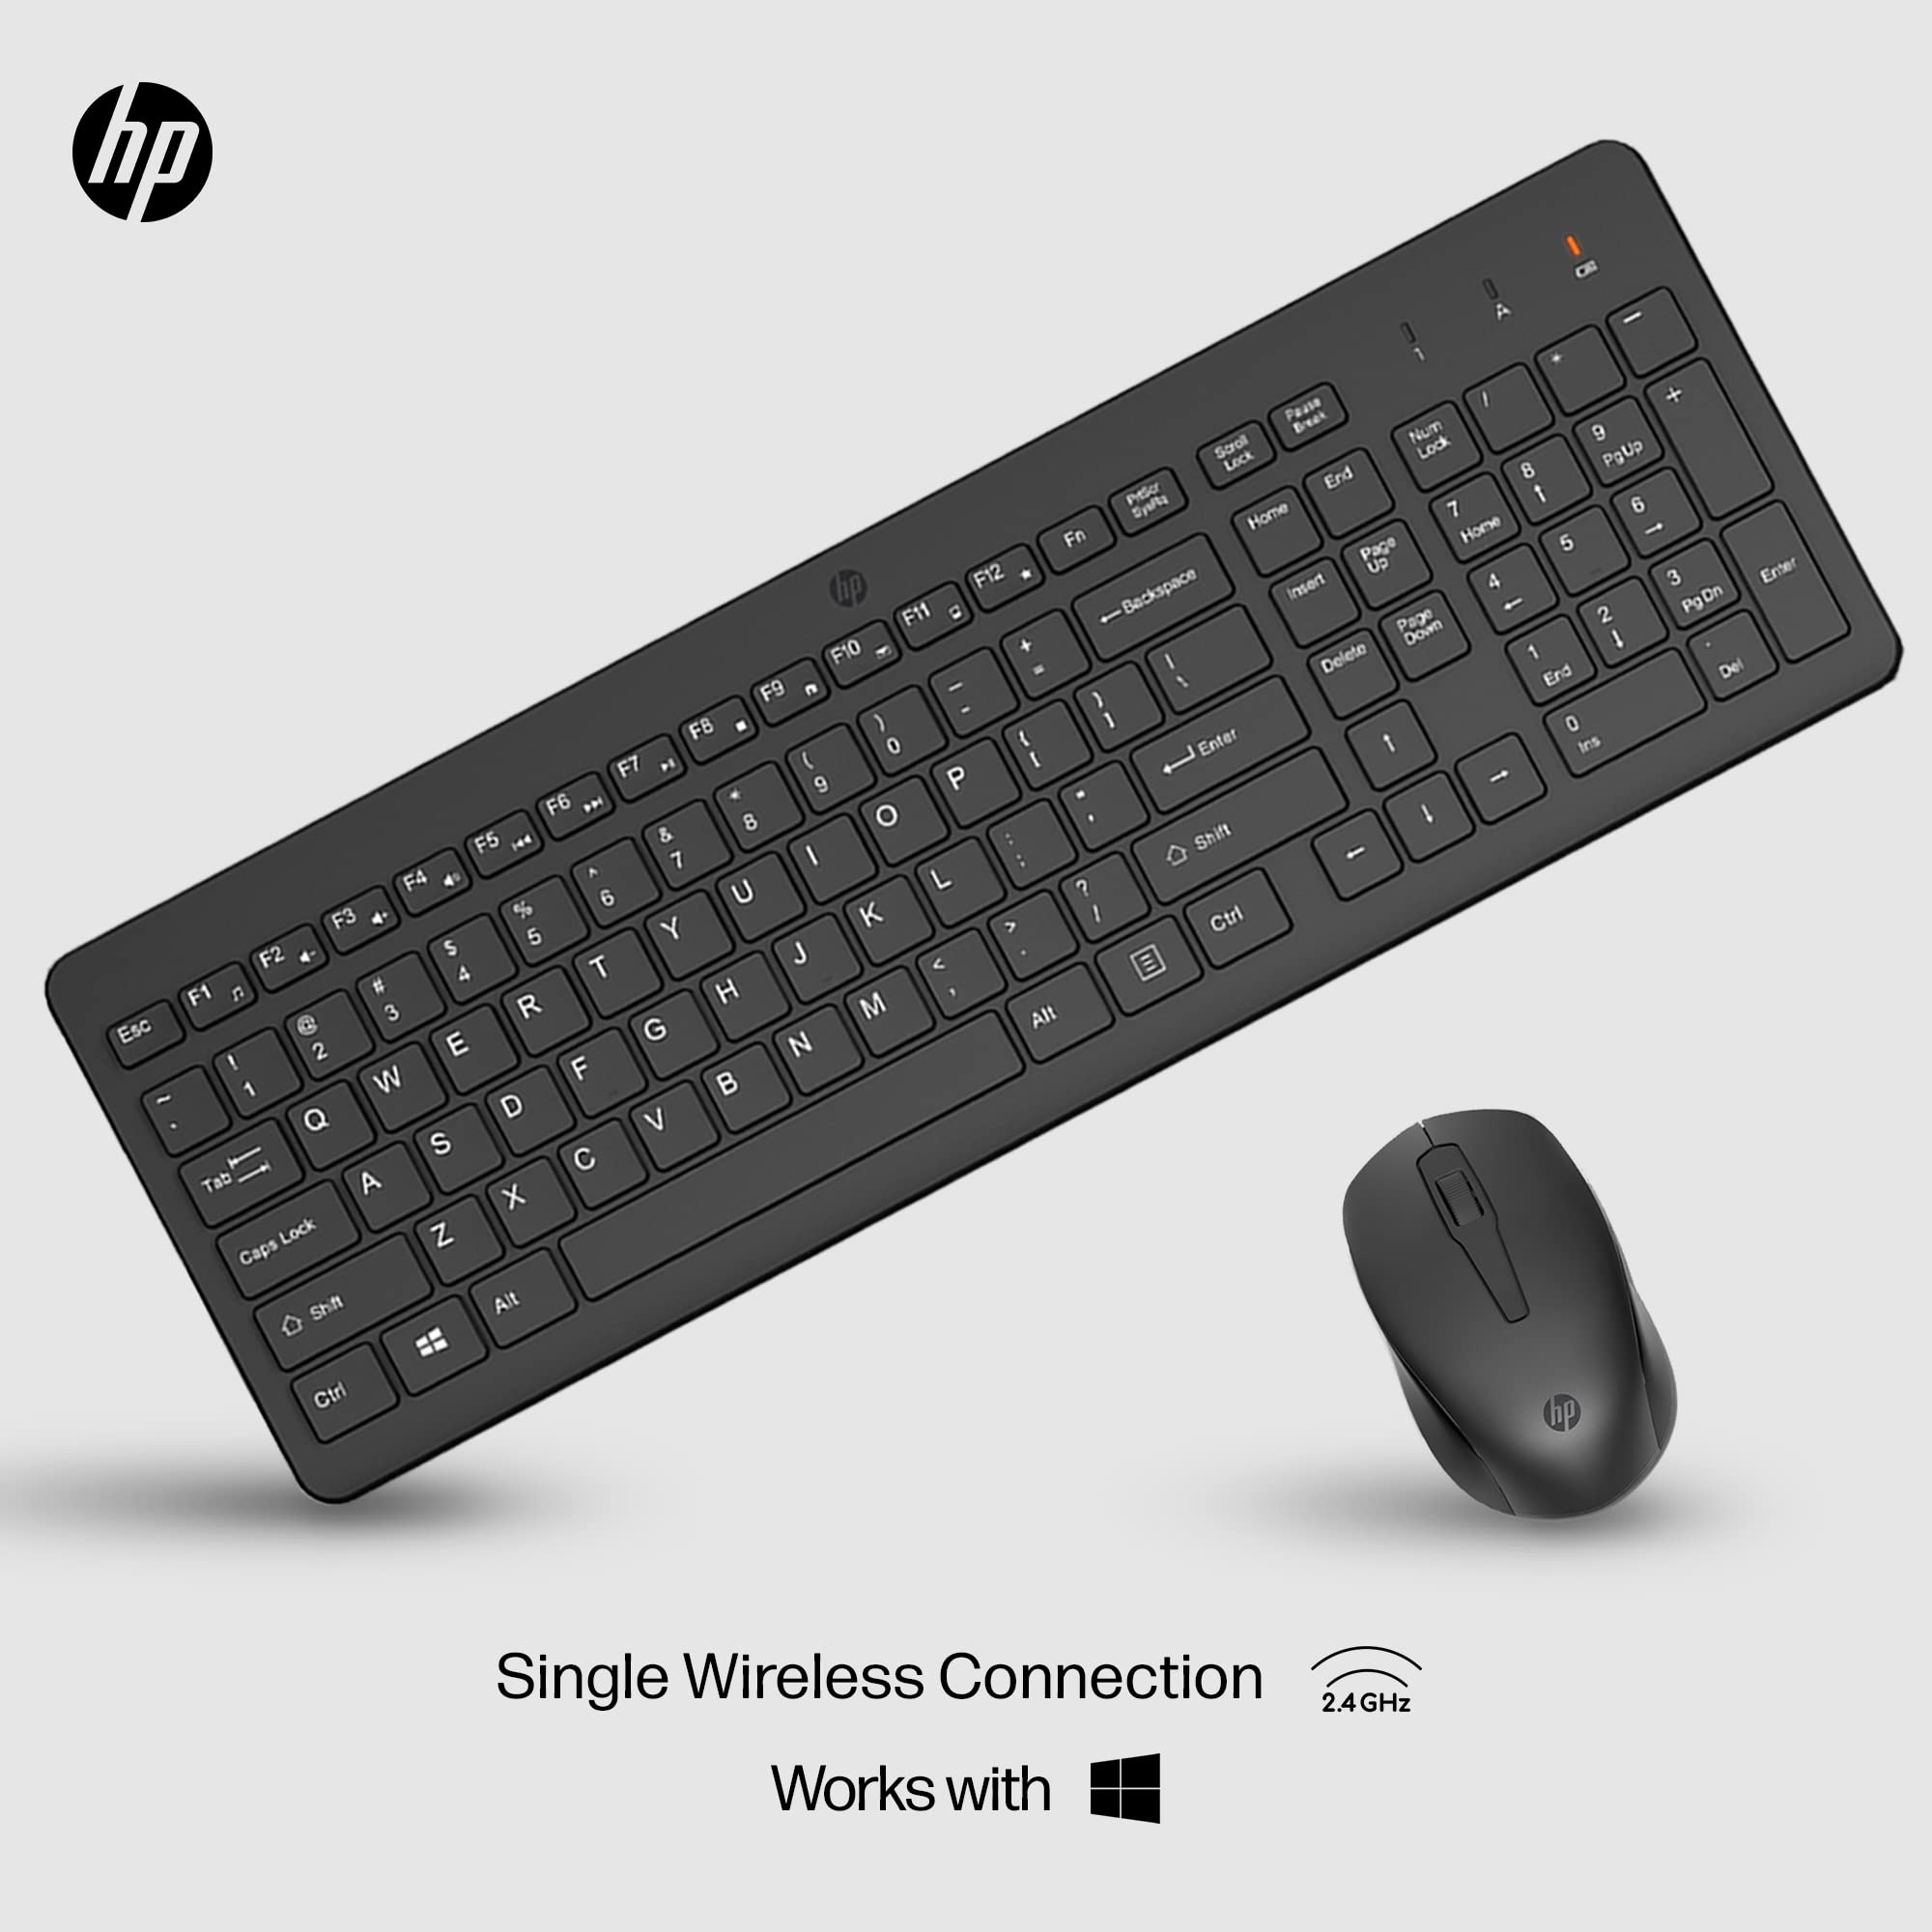 HP laptop keyboard with scroll lock key highlighted